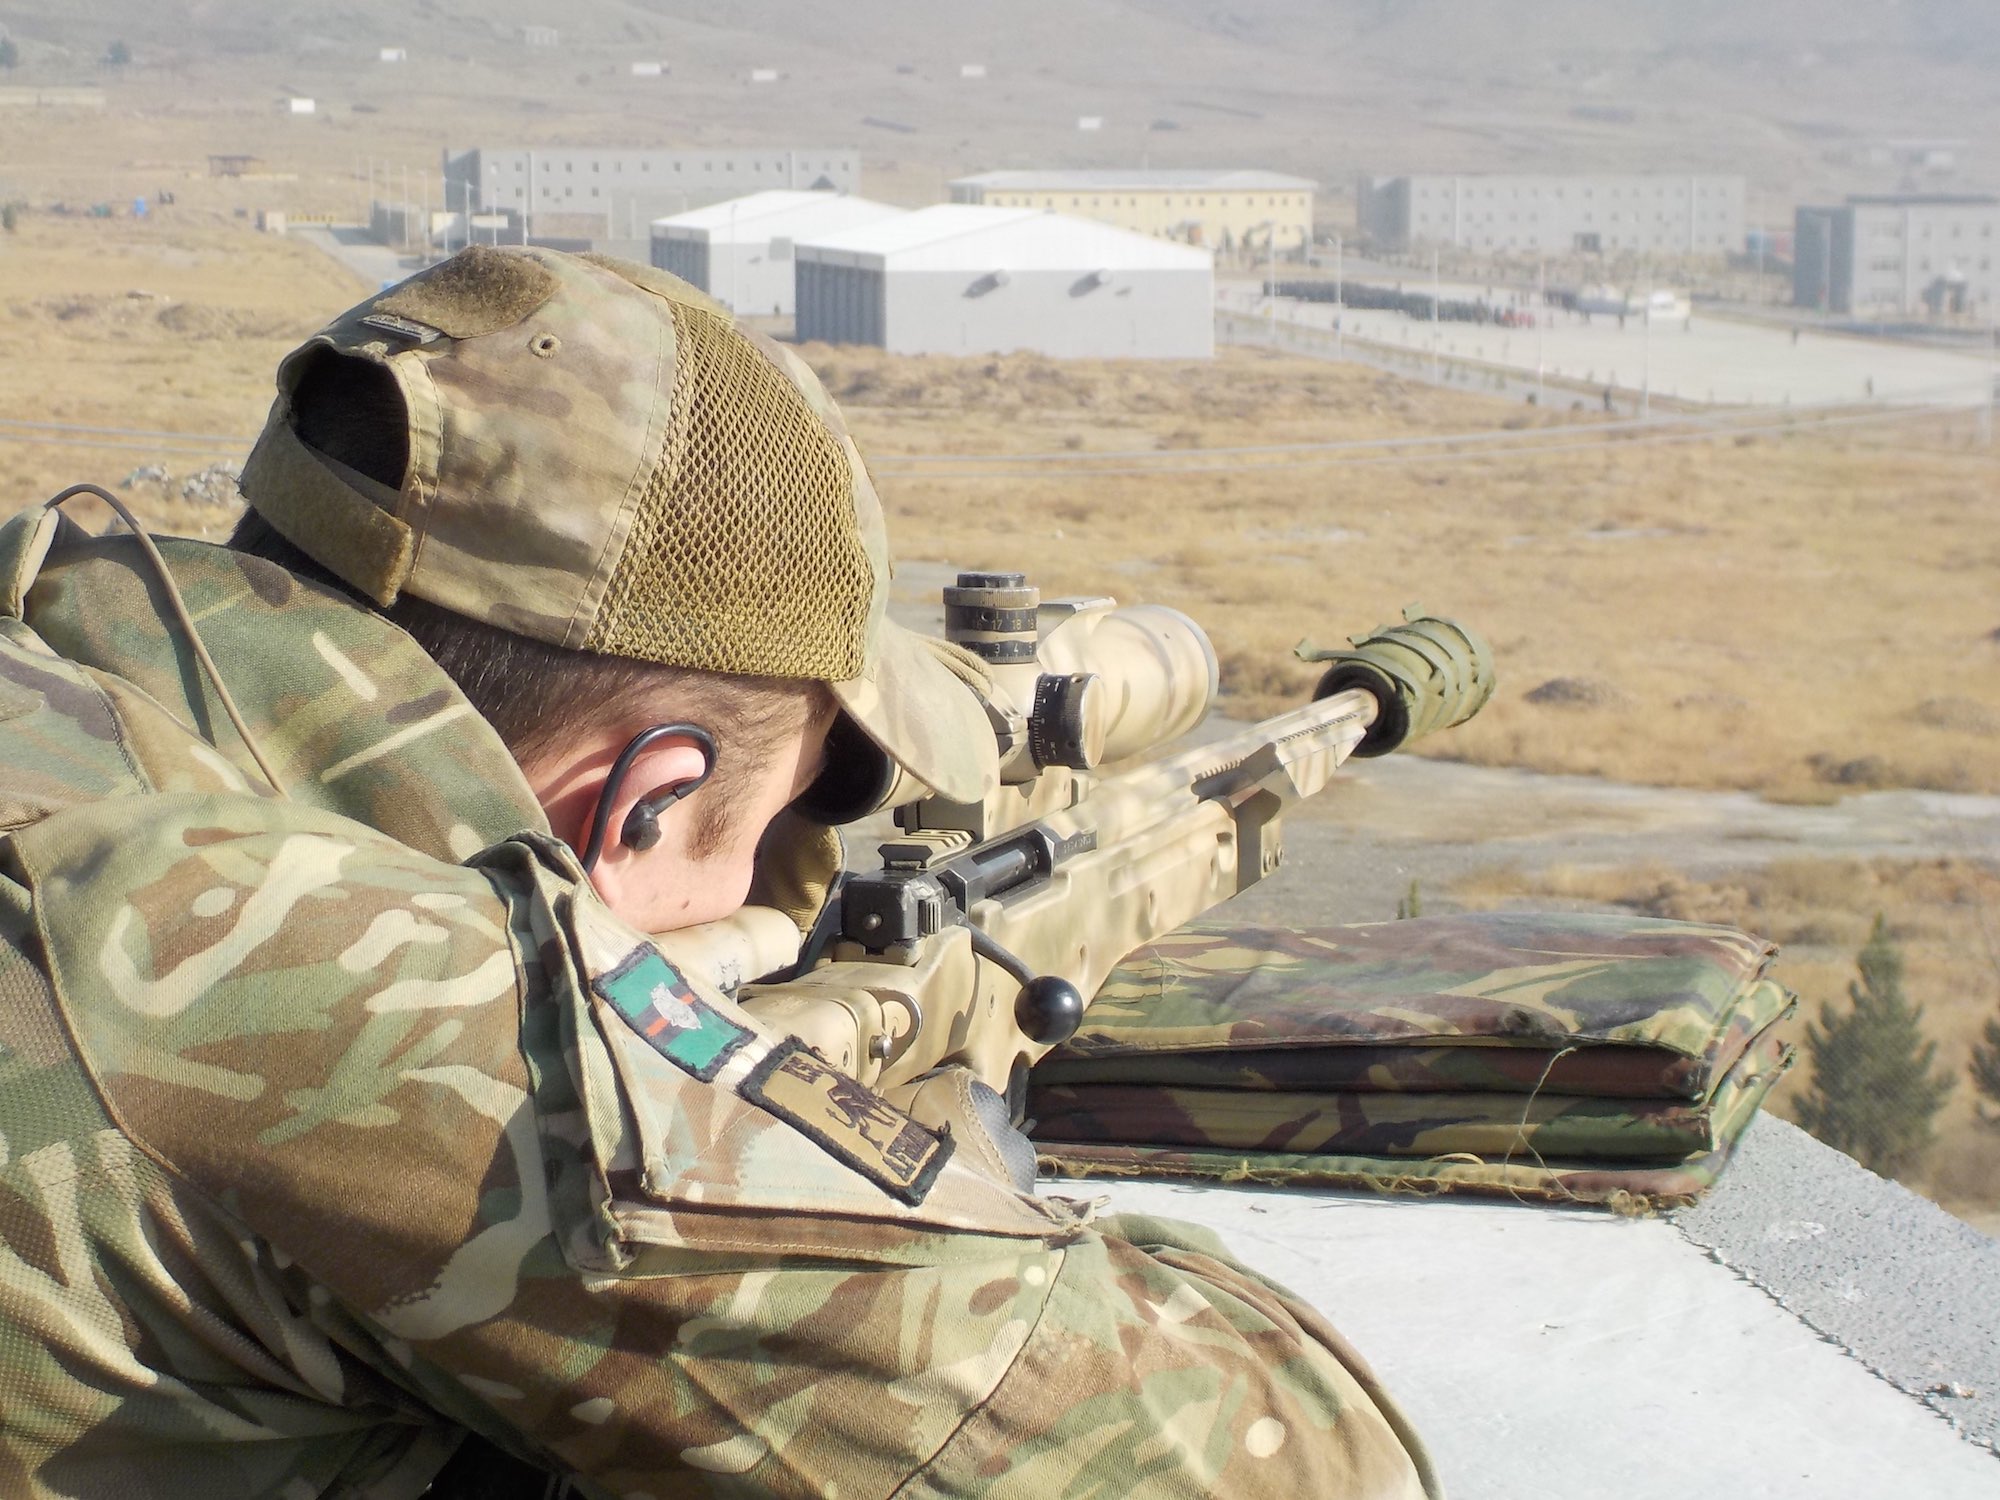 British Army sniper in Afghanistan